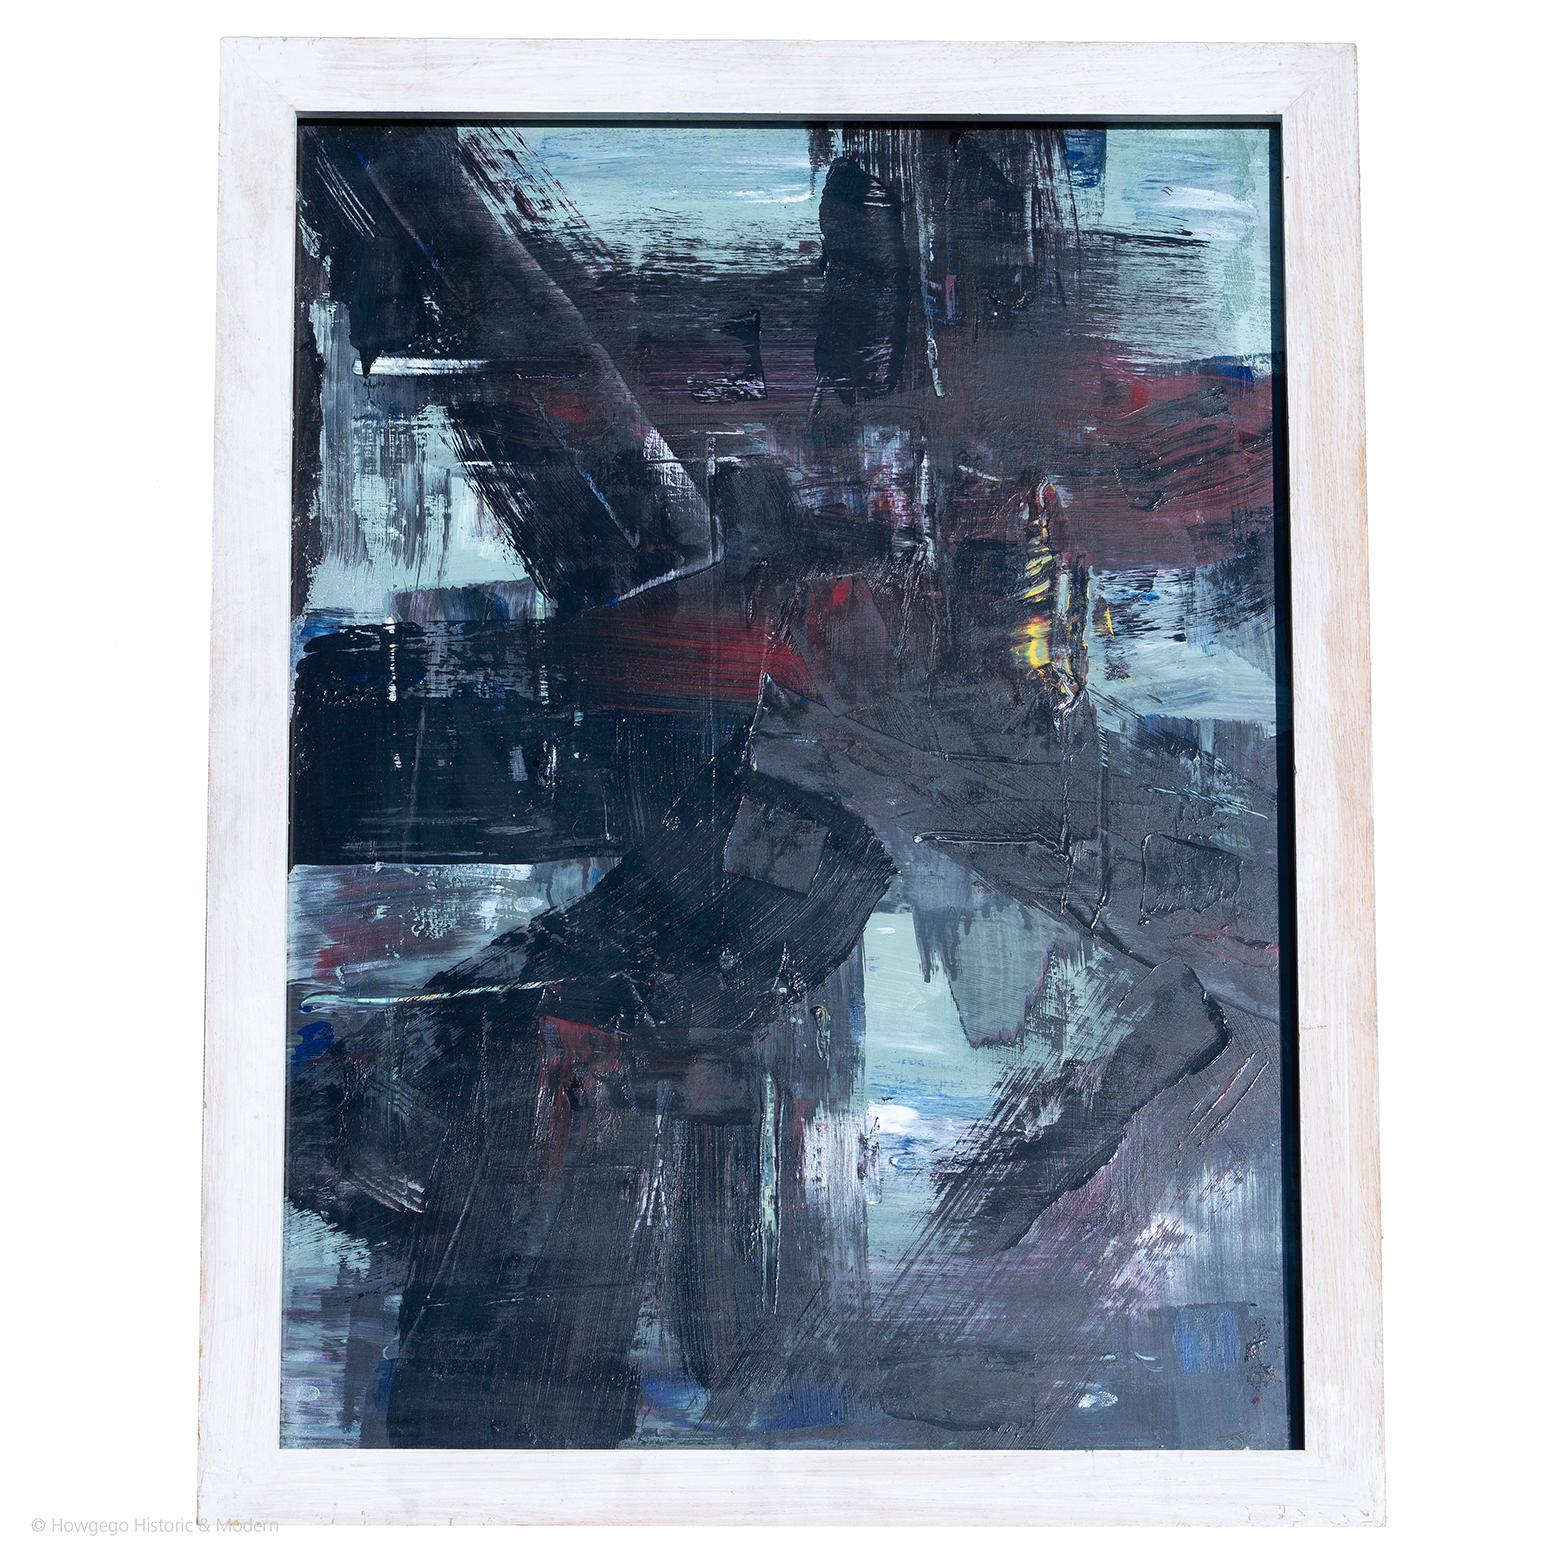 West Penwith Sea : Inscribed 'RJS' bottom right
label verso 'for Bryan with thanks'
The artist has abstracted the composition and using rough handling, a palette and thick impasto in tones of black, grey, white, yellow, blue and red evokes the